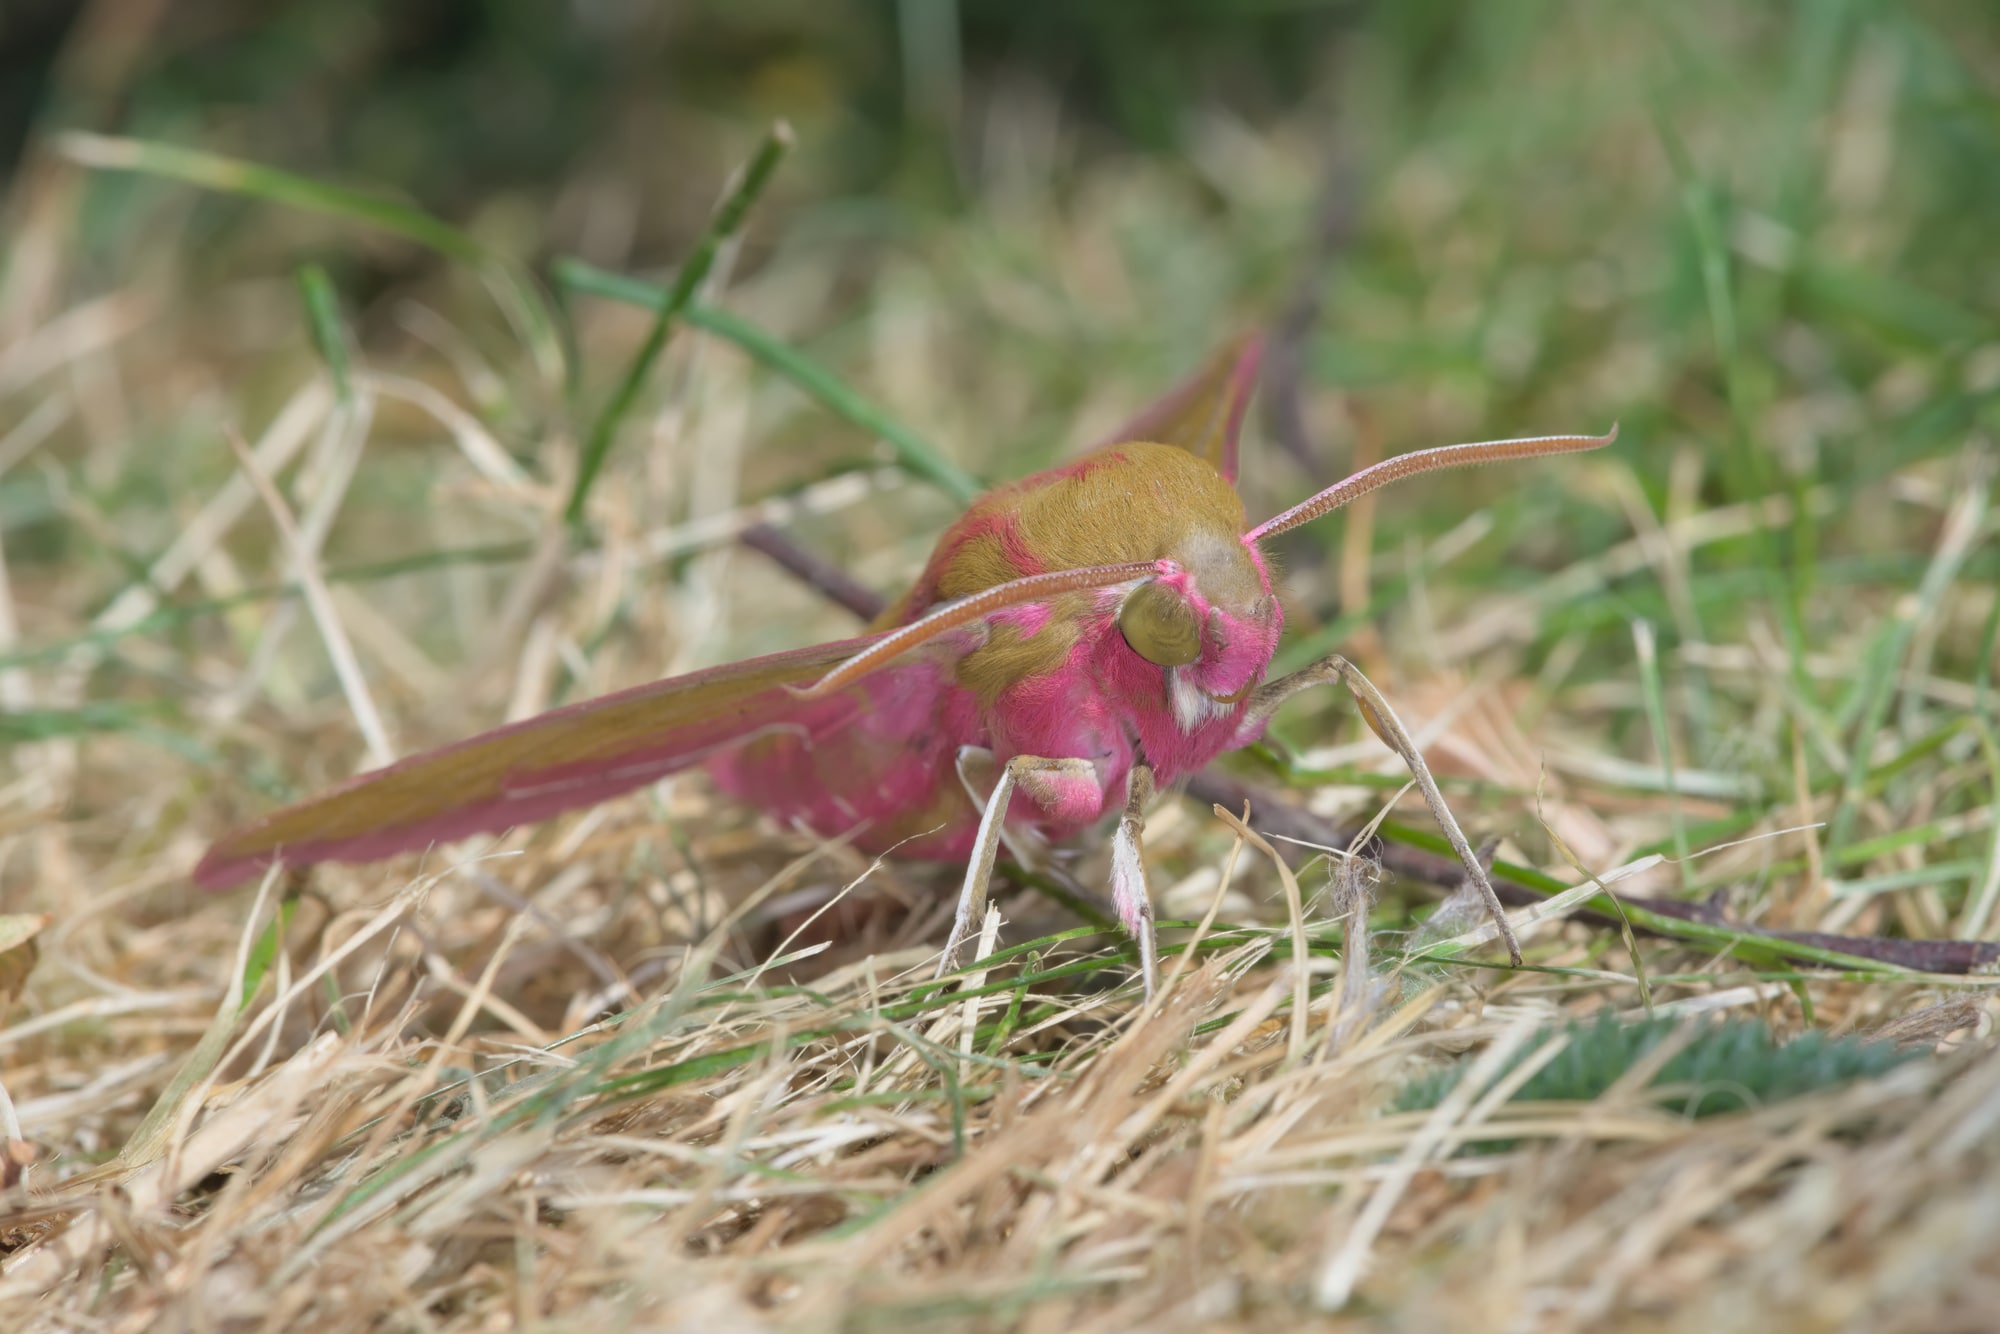 Front on low angle of a large pink and mustard elephant hawk moth on dry grass, with the compound eyes clearly visible.